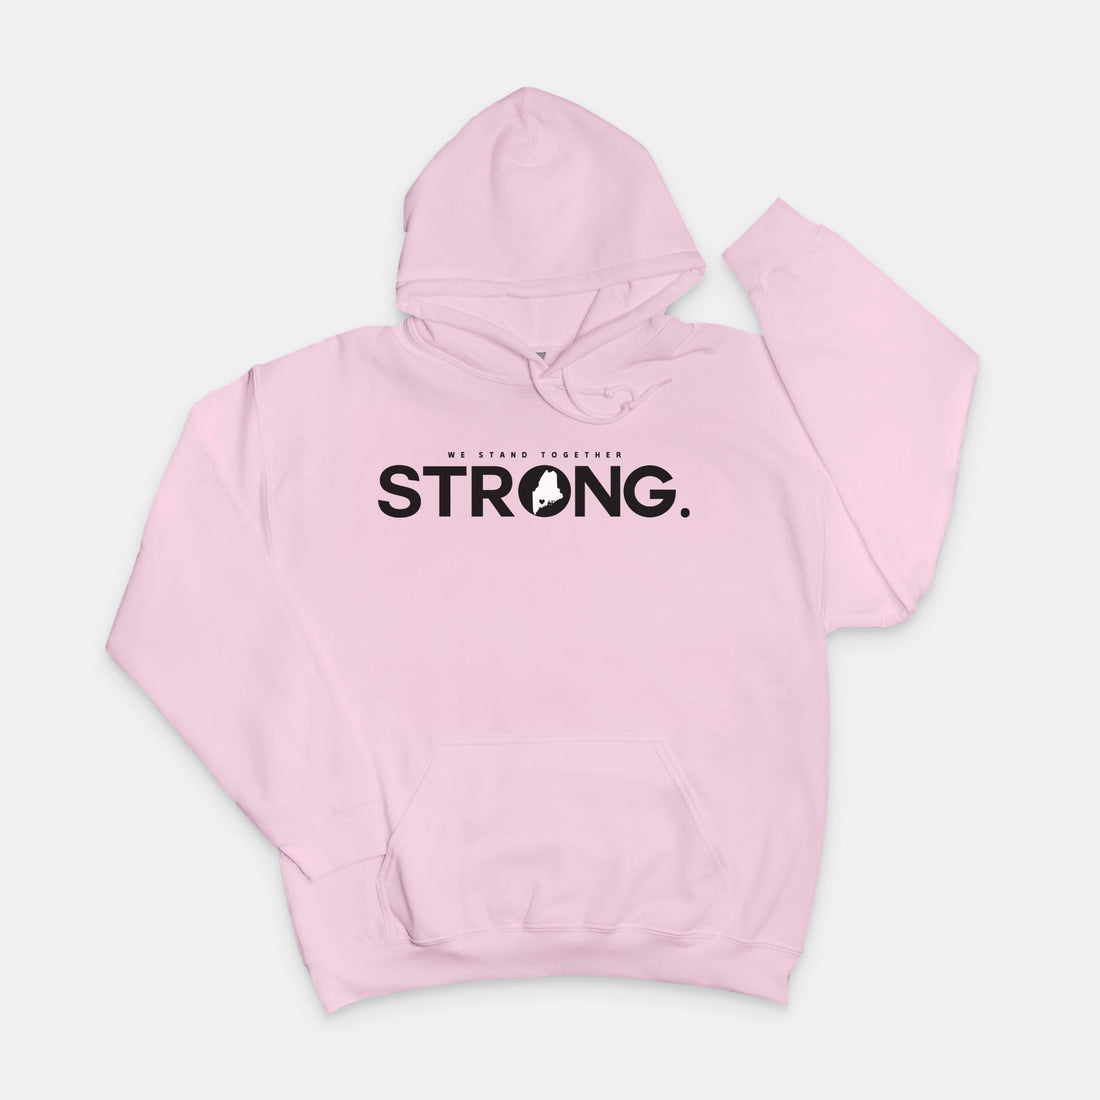 We Stand Together STRONG.  Maine Support Lewiston Hoodie Sweatshirt - ALL proceeds will go to victim funds